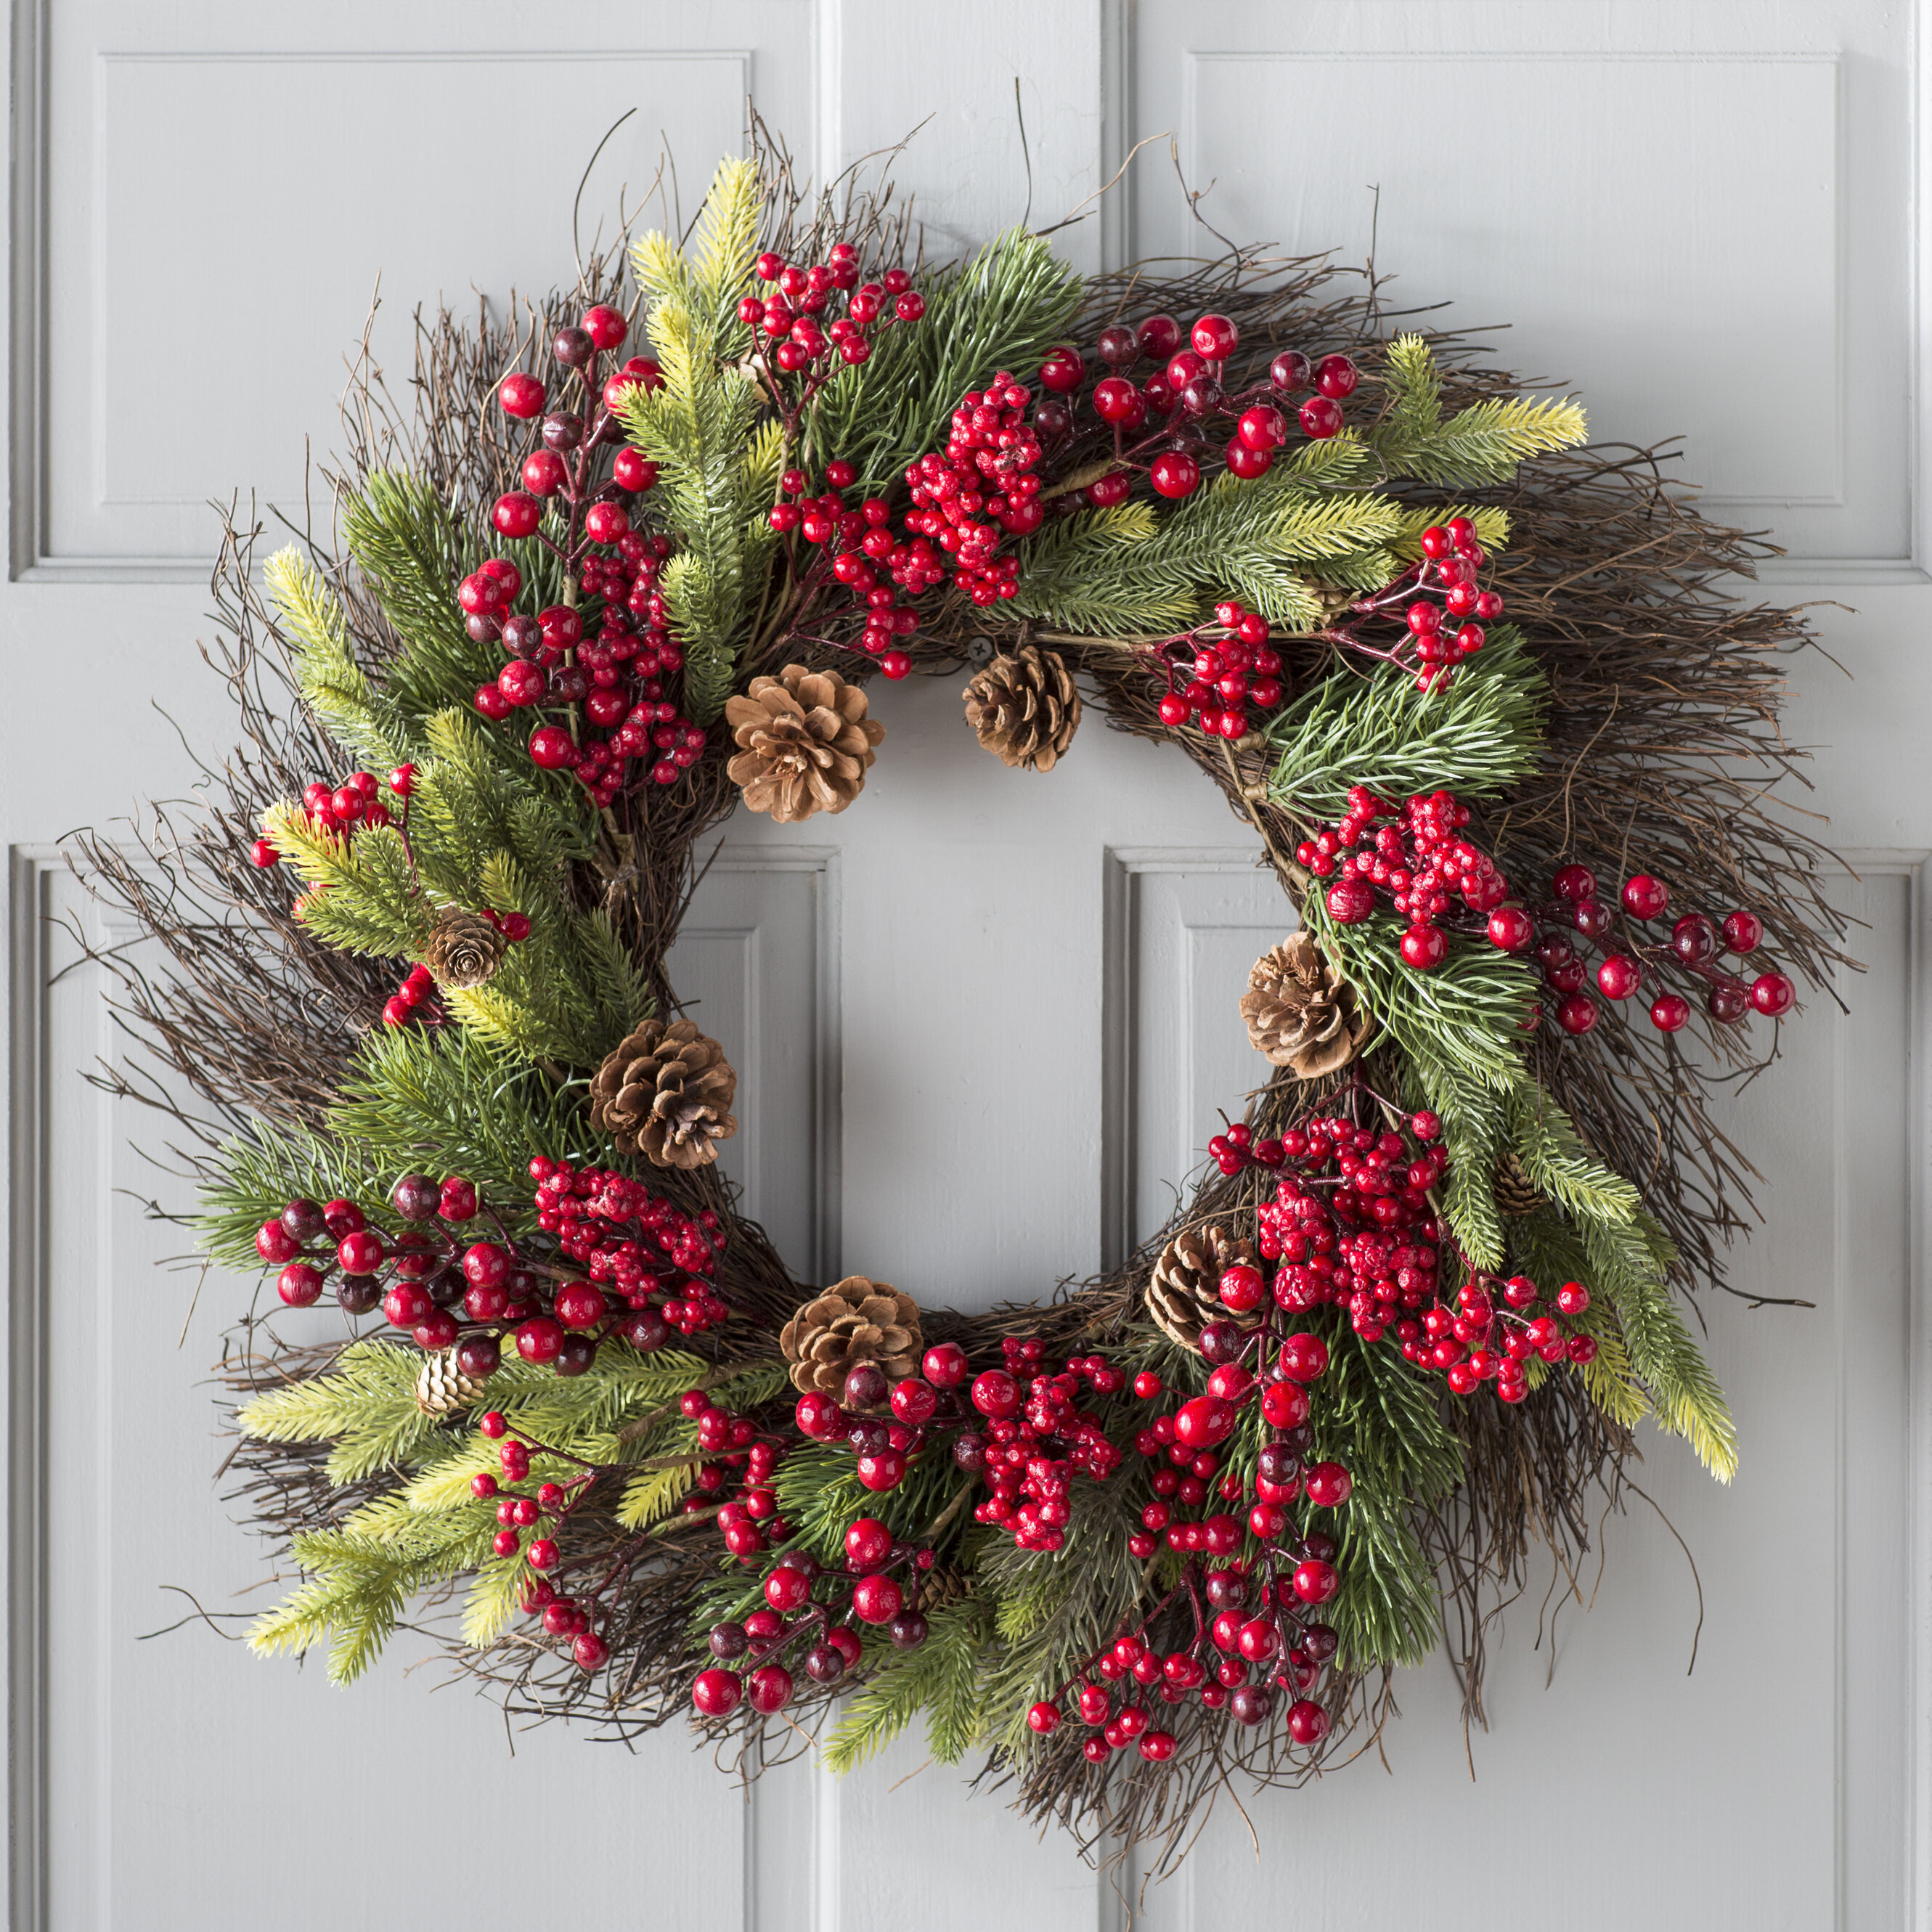 25-inch Diameter Primitives by Kathy Pine with Cones and Berries Wreath